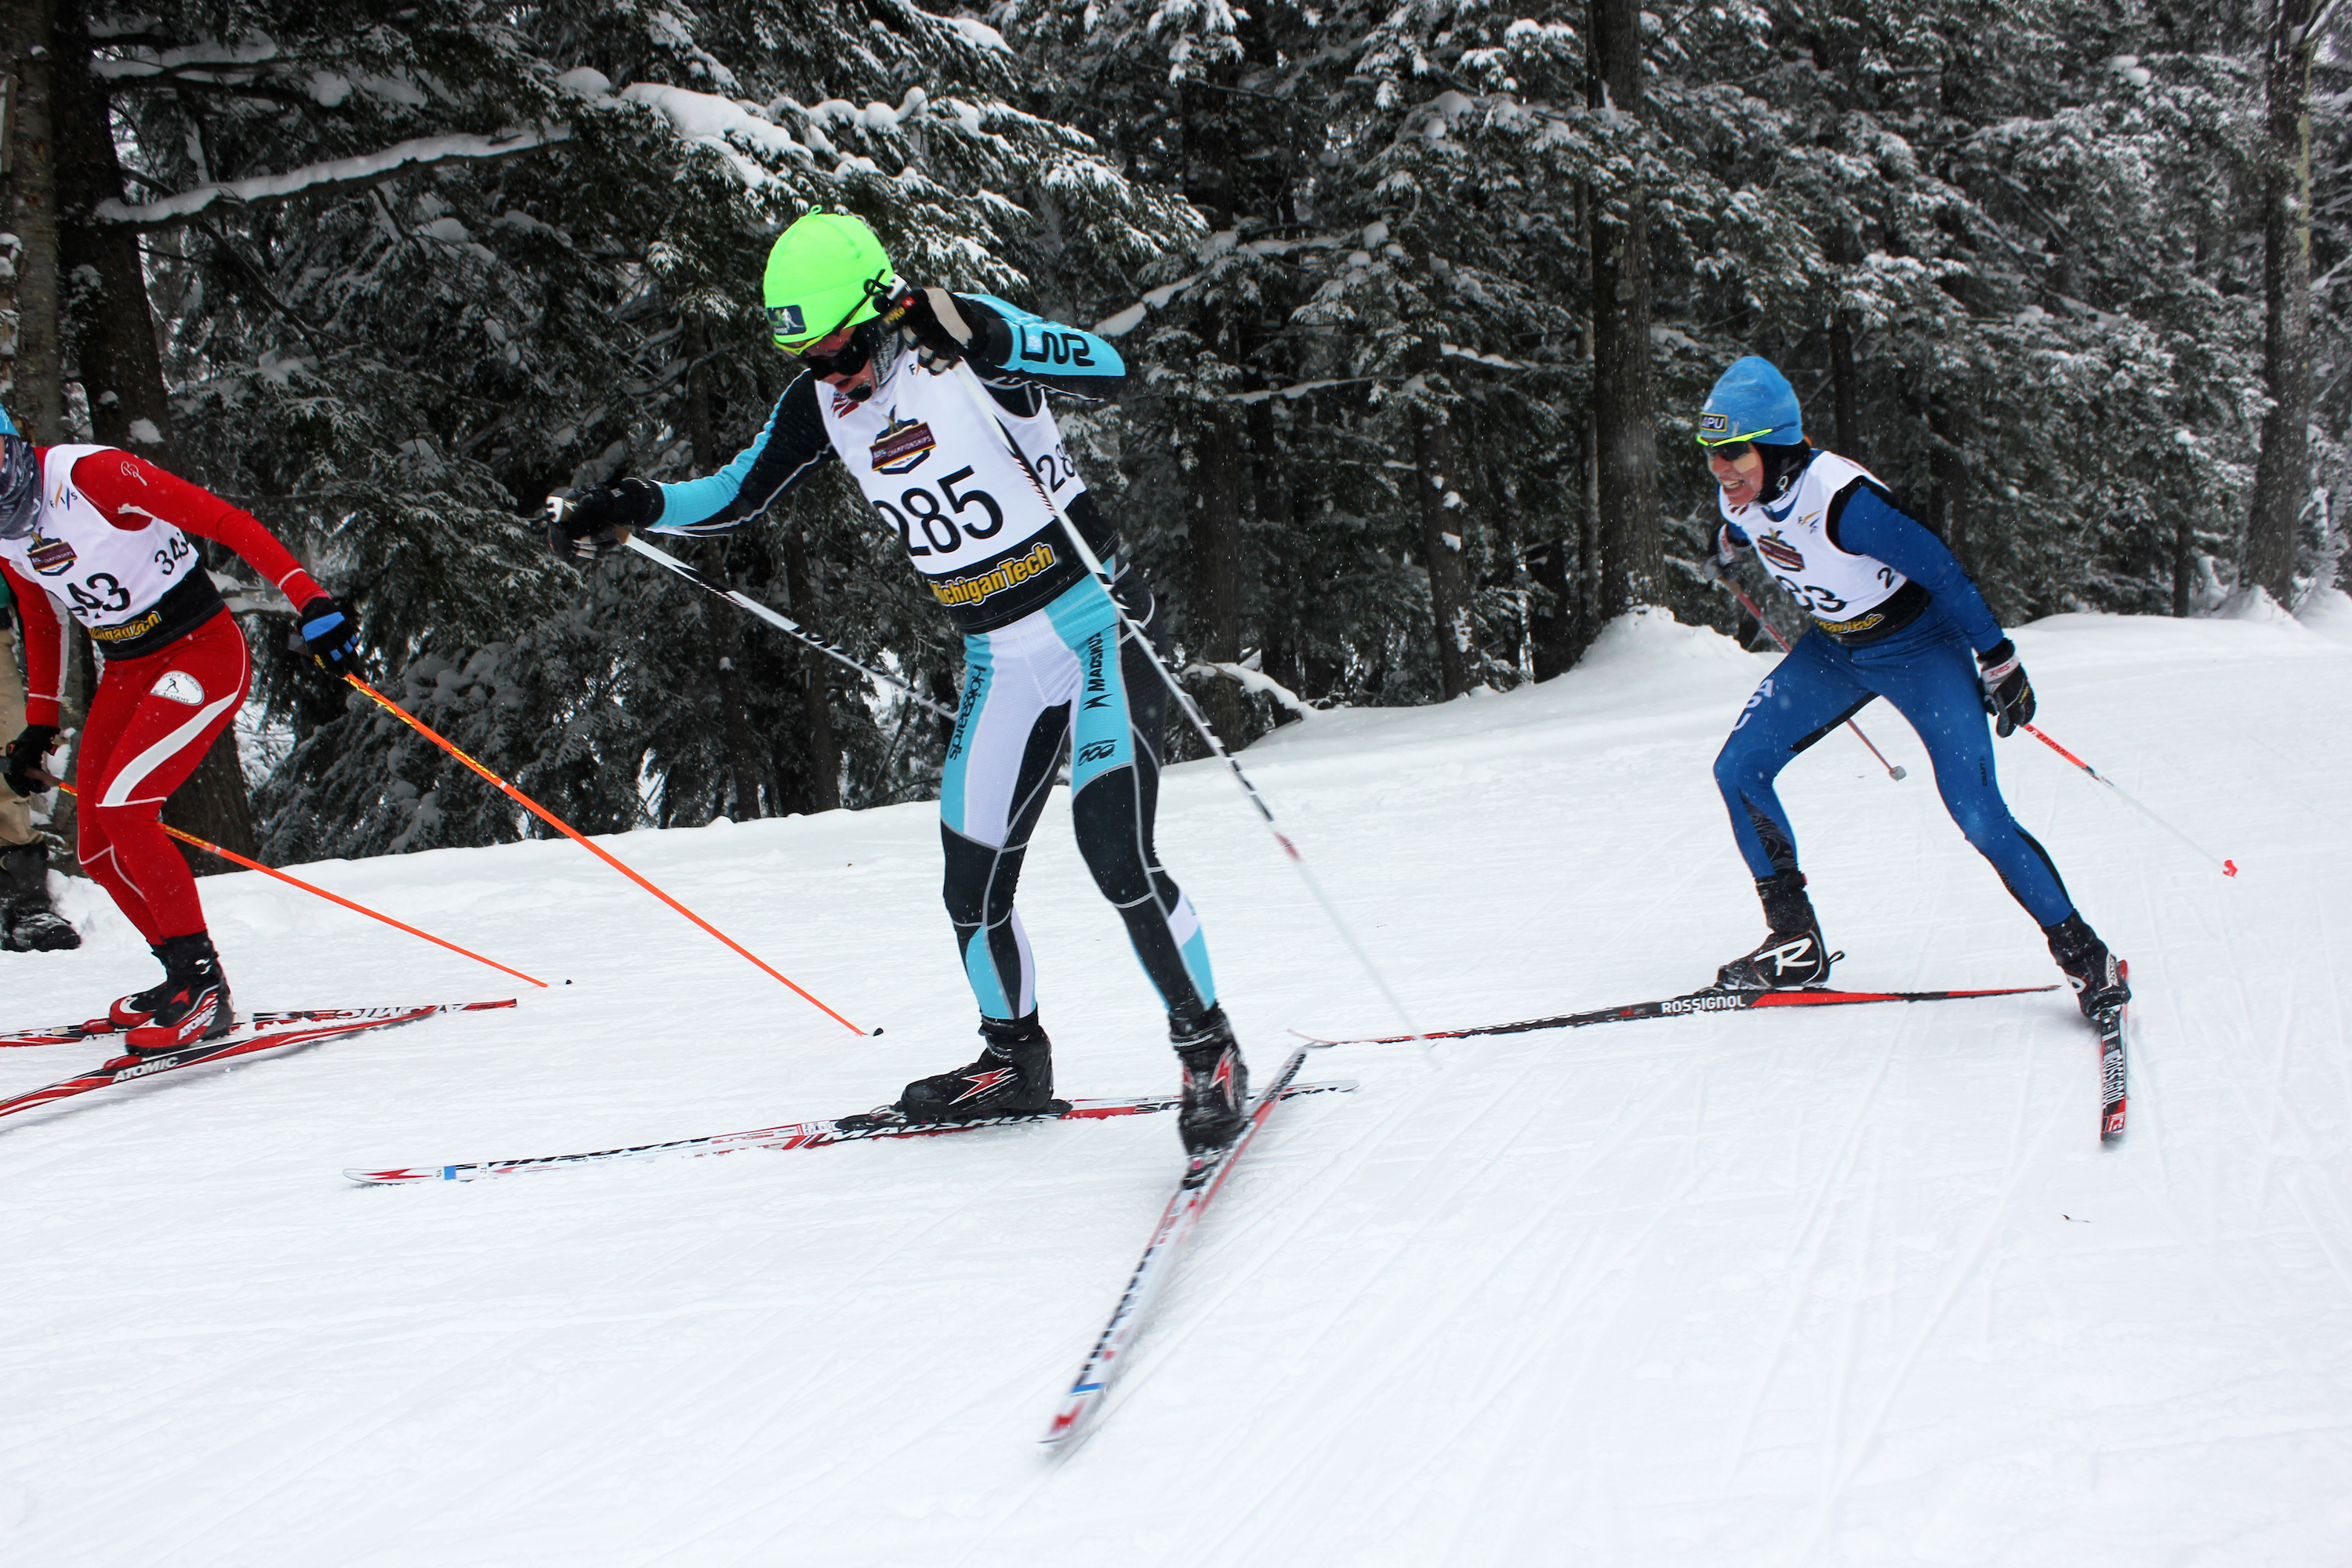 Caitlin Gregg (l) of Team Gregg/Madshus leads Rosie Brennan (r) of APU on in the final lap of the 10 k freestyle at the 2015 U.S. Cross Country Championships in Houghton, Mich. Gregg won the race, while Brennan earned third place. 